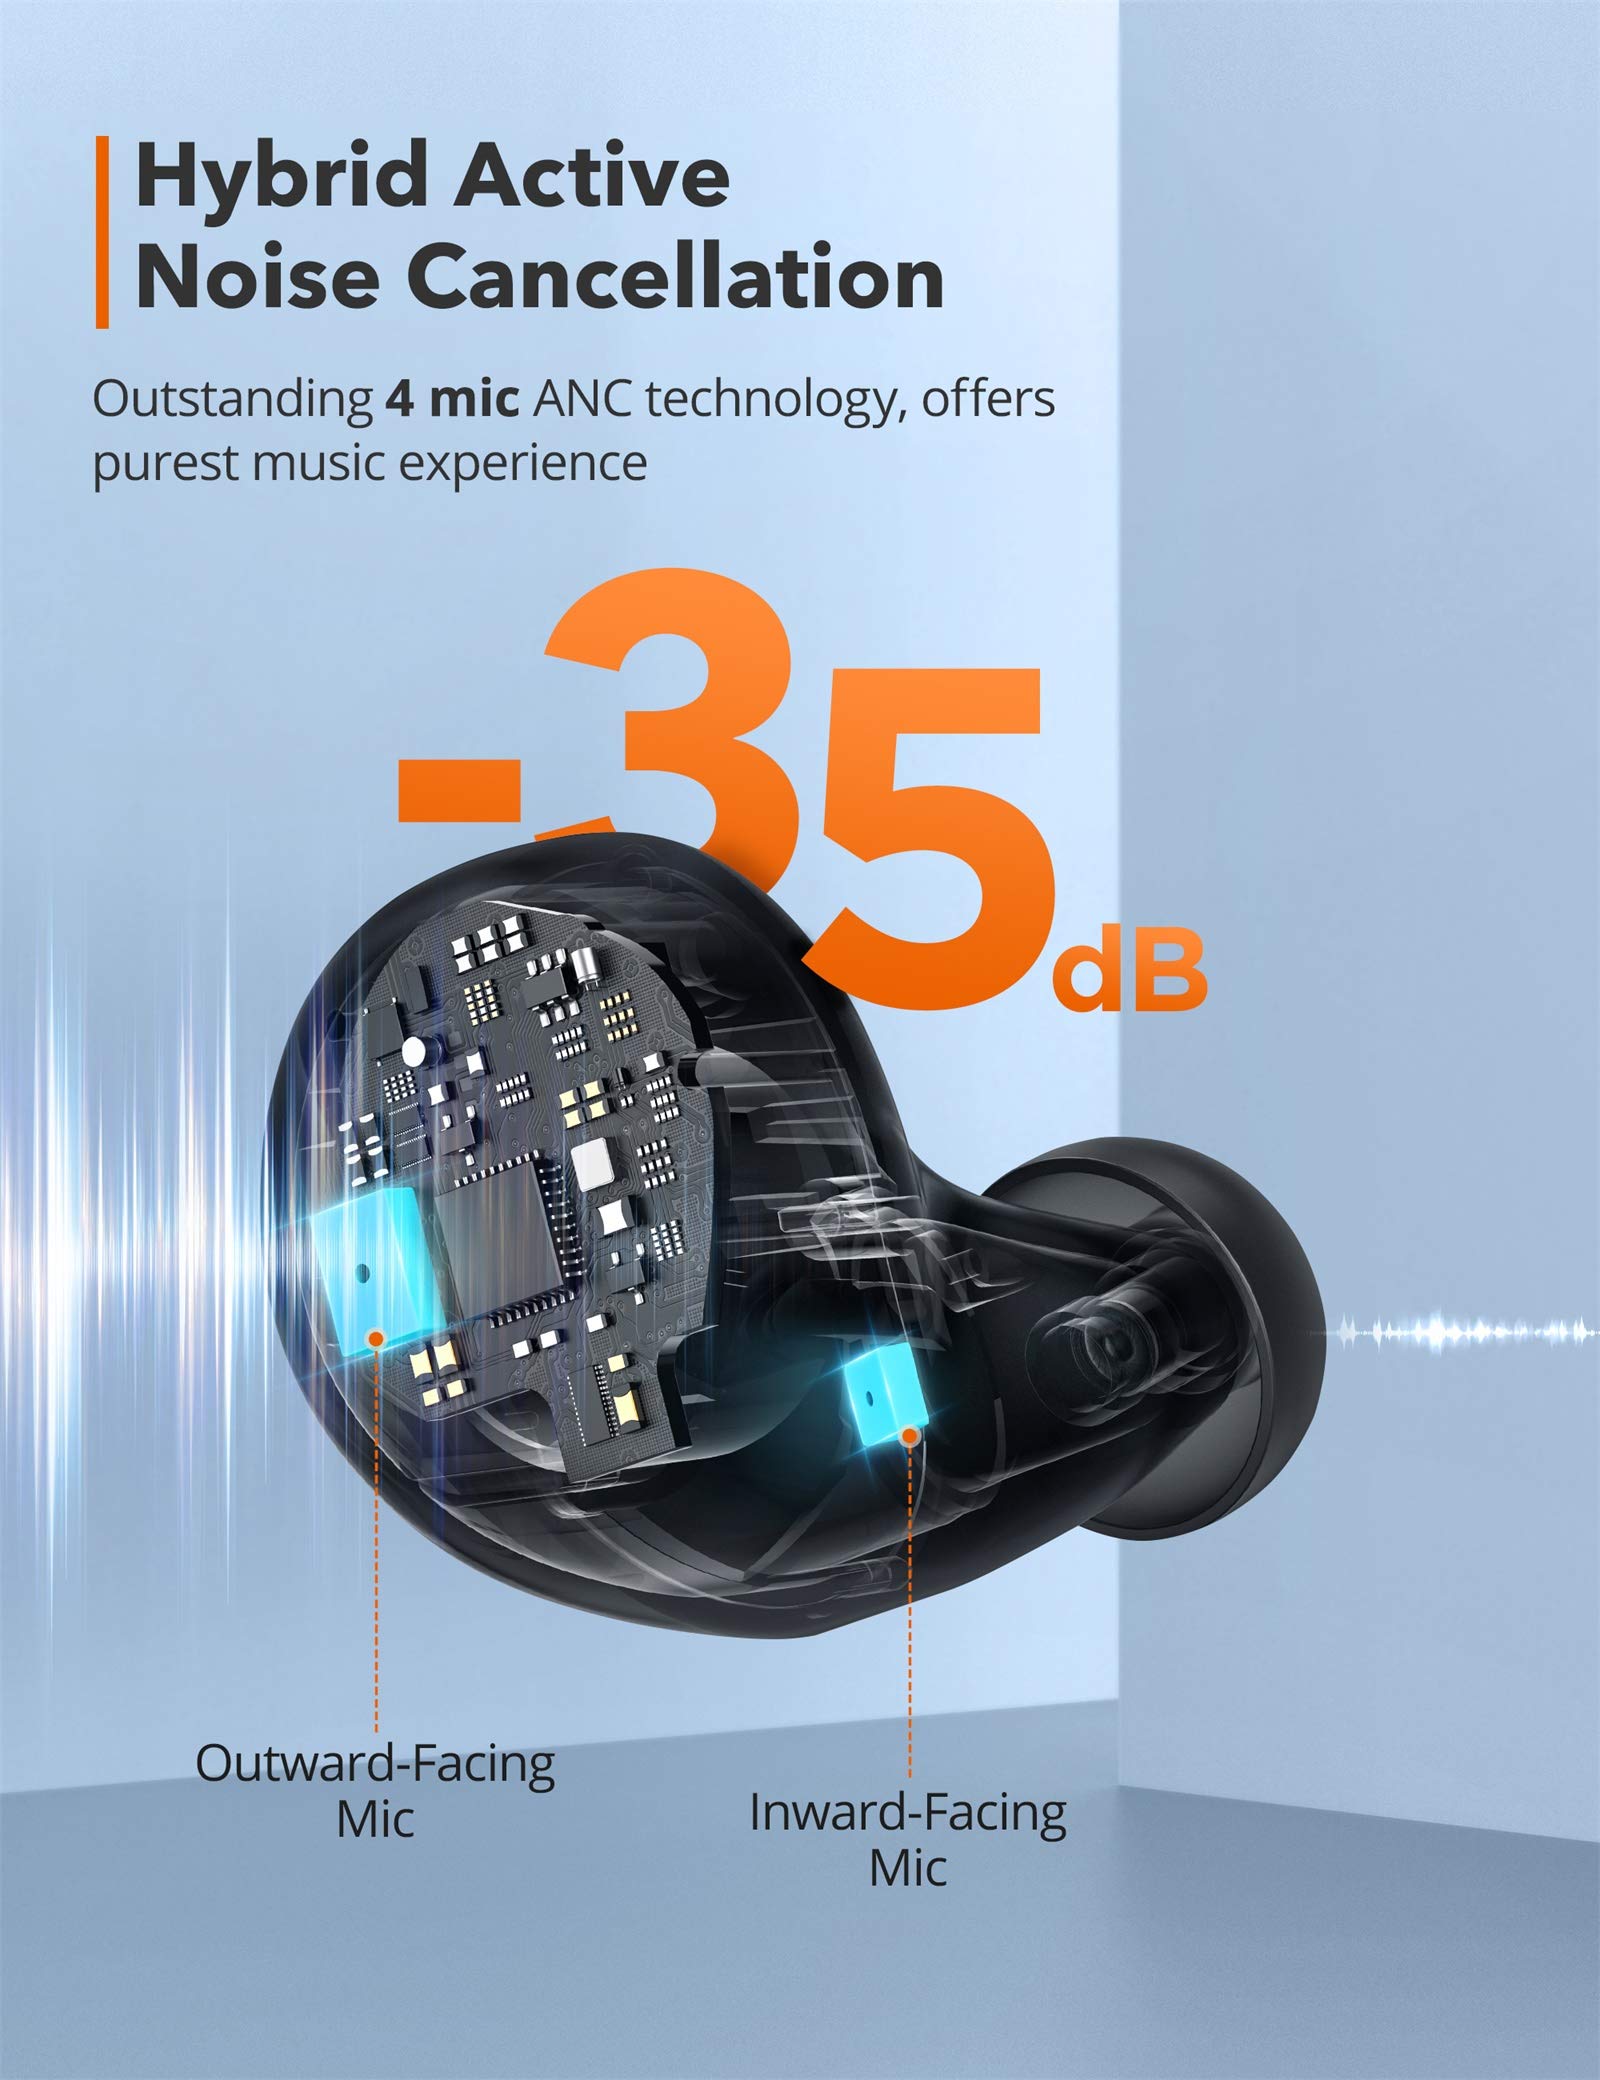 True Wireless Earbuds Active Noise Cancelling TaoTronics SoundLiberty 94 4 Mic ANC Ear Buds Bluetooth 5.1 Earphones USB-C Charging 32h Playtime Touch Control Deep Bass for Sport